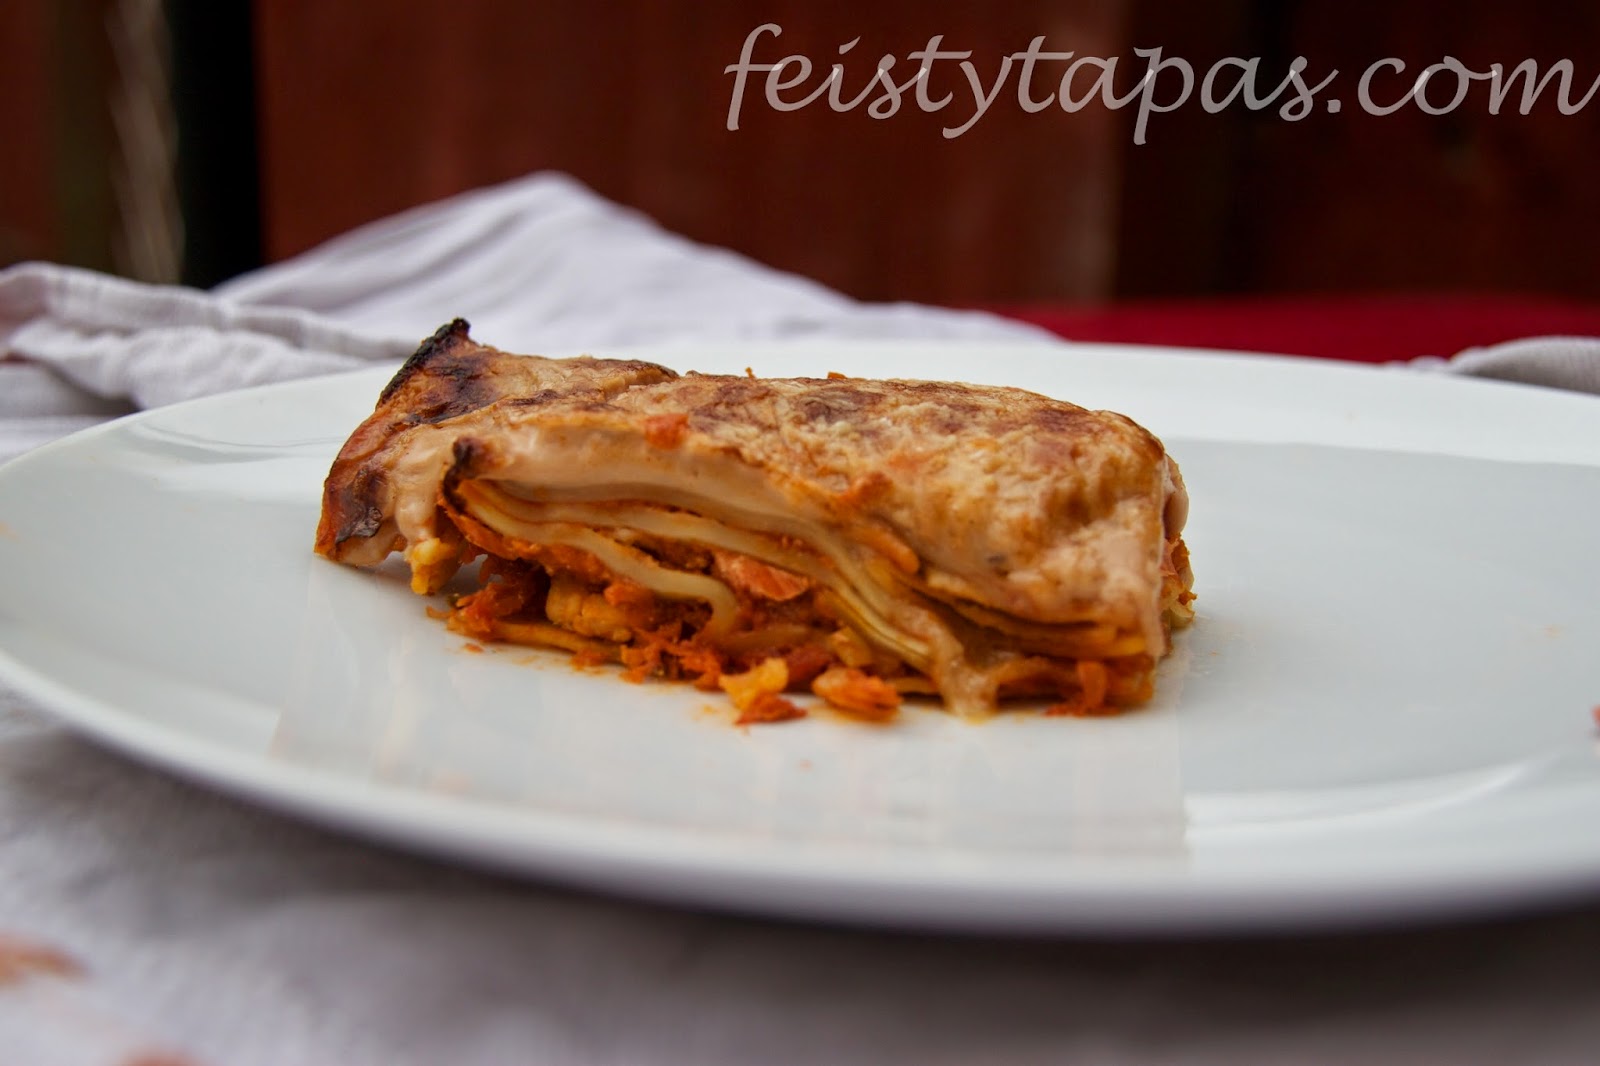 Thermomix Seafood Lasagna with Beetroot Béchamel